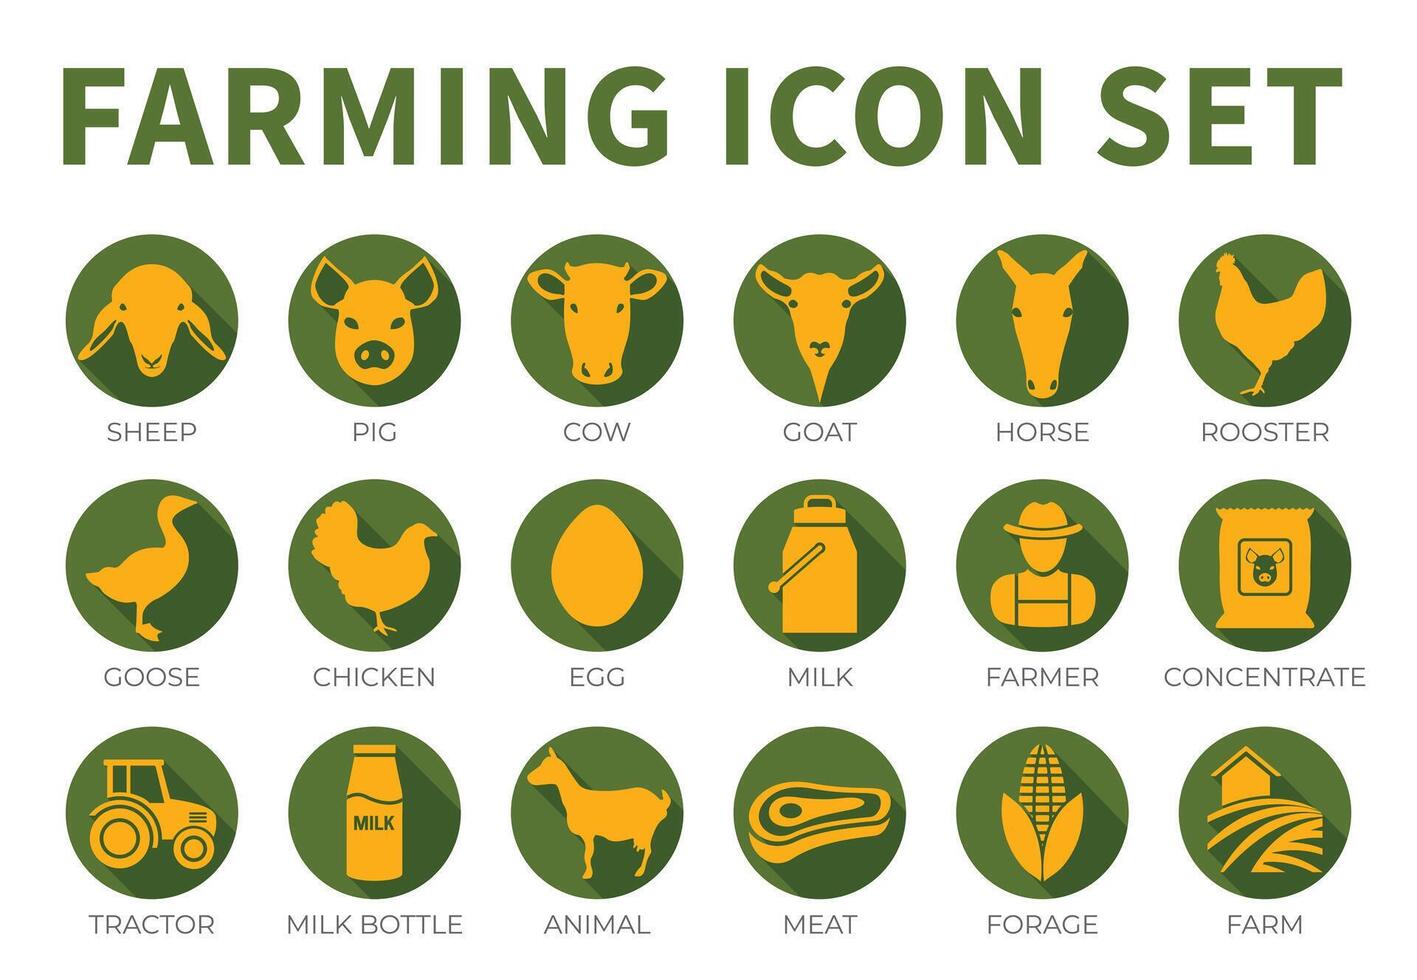 Green Colorful Round Farming or Farm Icon Set of Sheep, Pig, Cow, Goat, Horse, Rooster, Goose, Chicken, Egg, Milk, Farmer, Concentrate, Tractor, Bottle, Animal, Meat and Forage Icons. vector